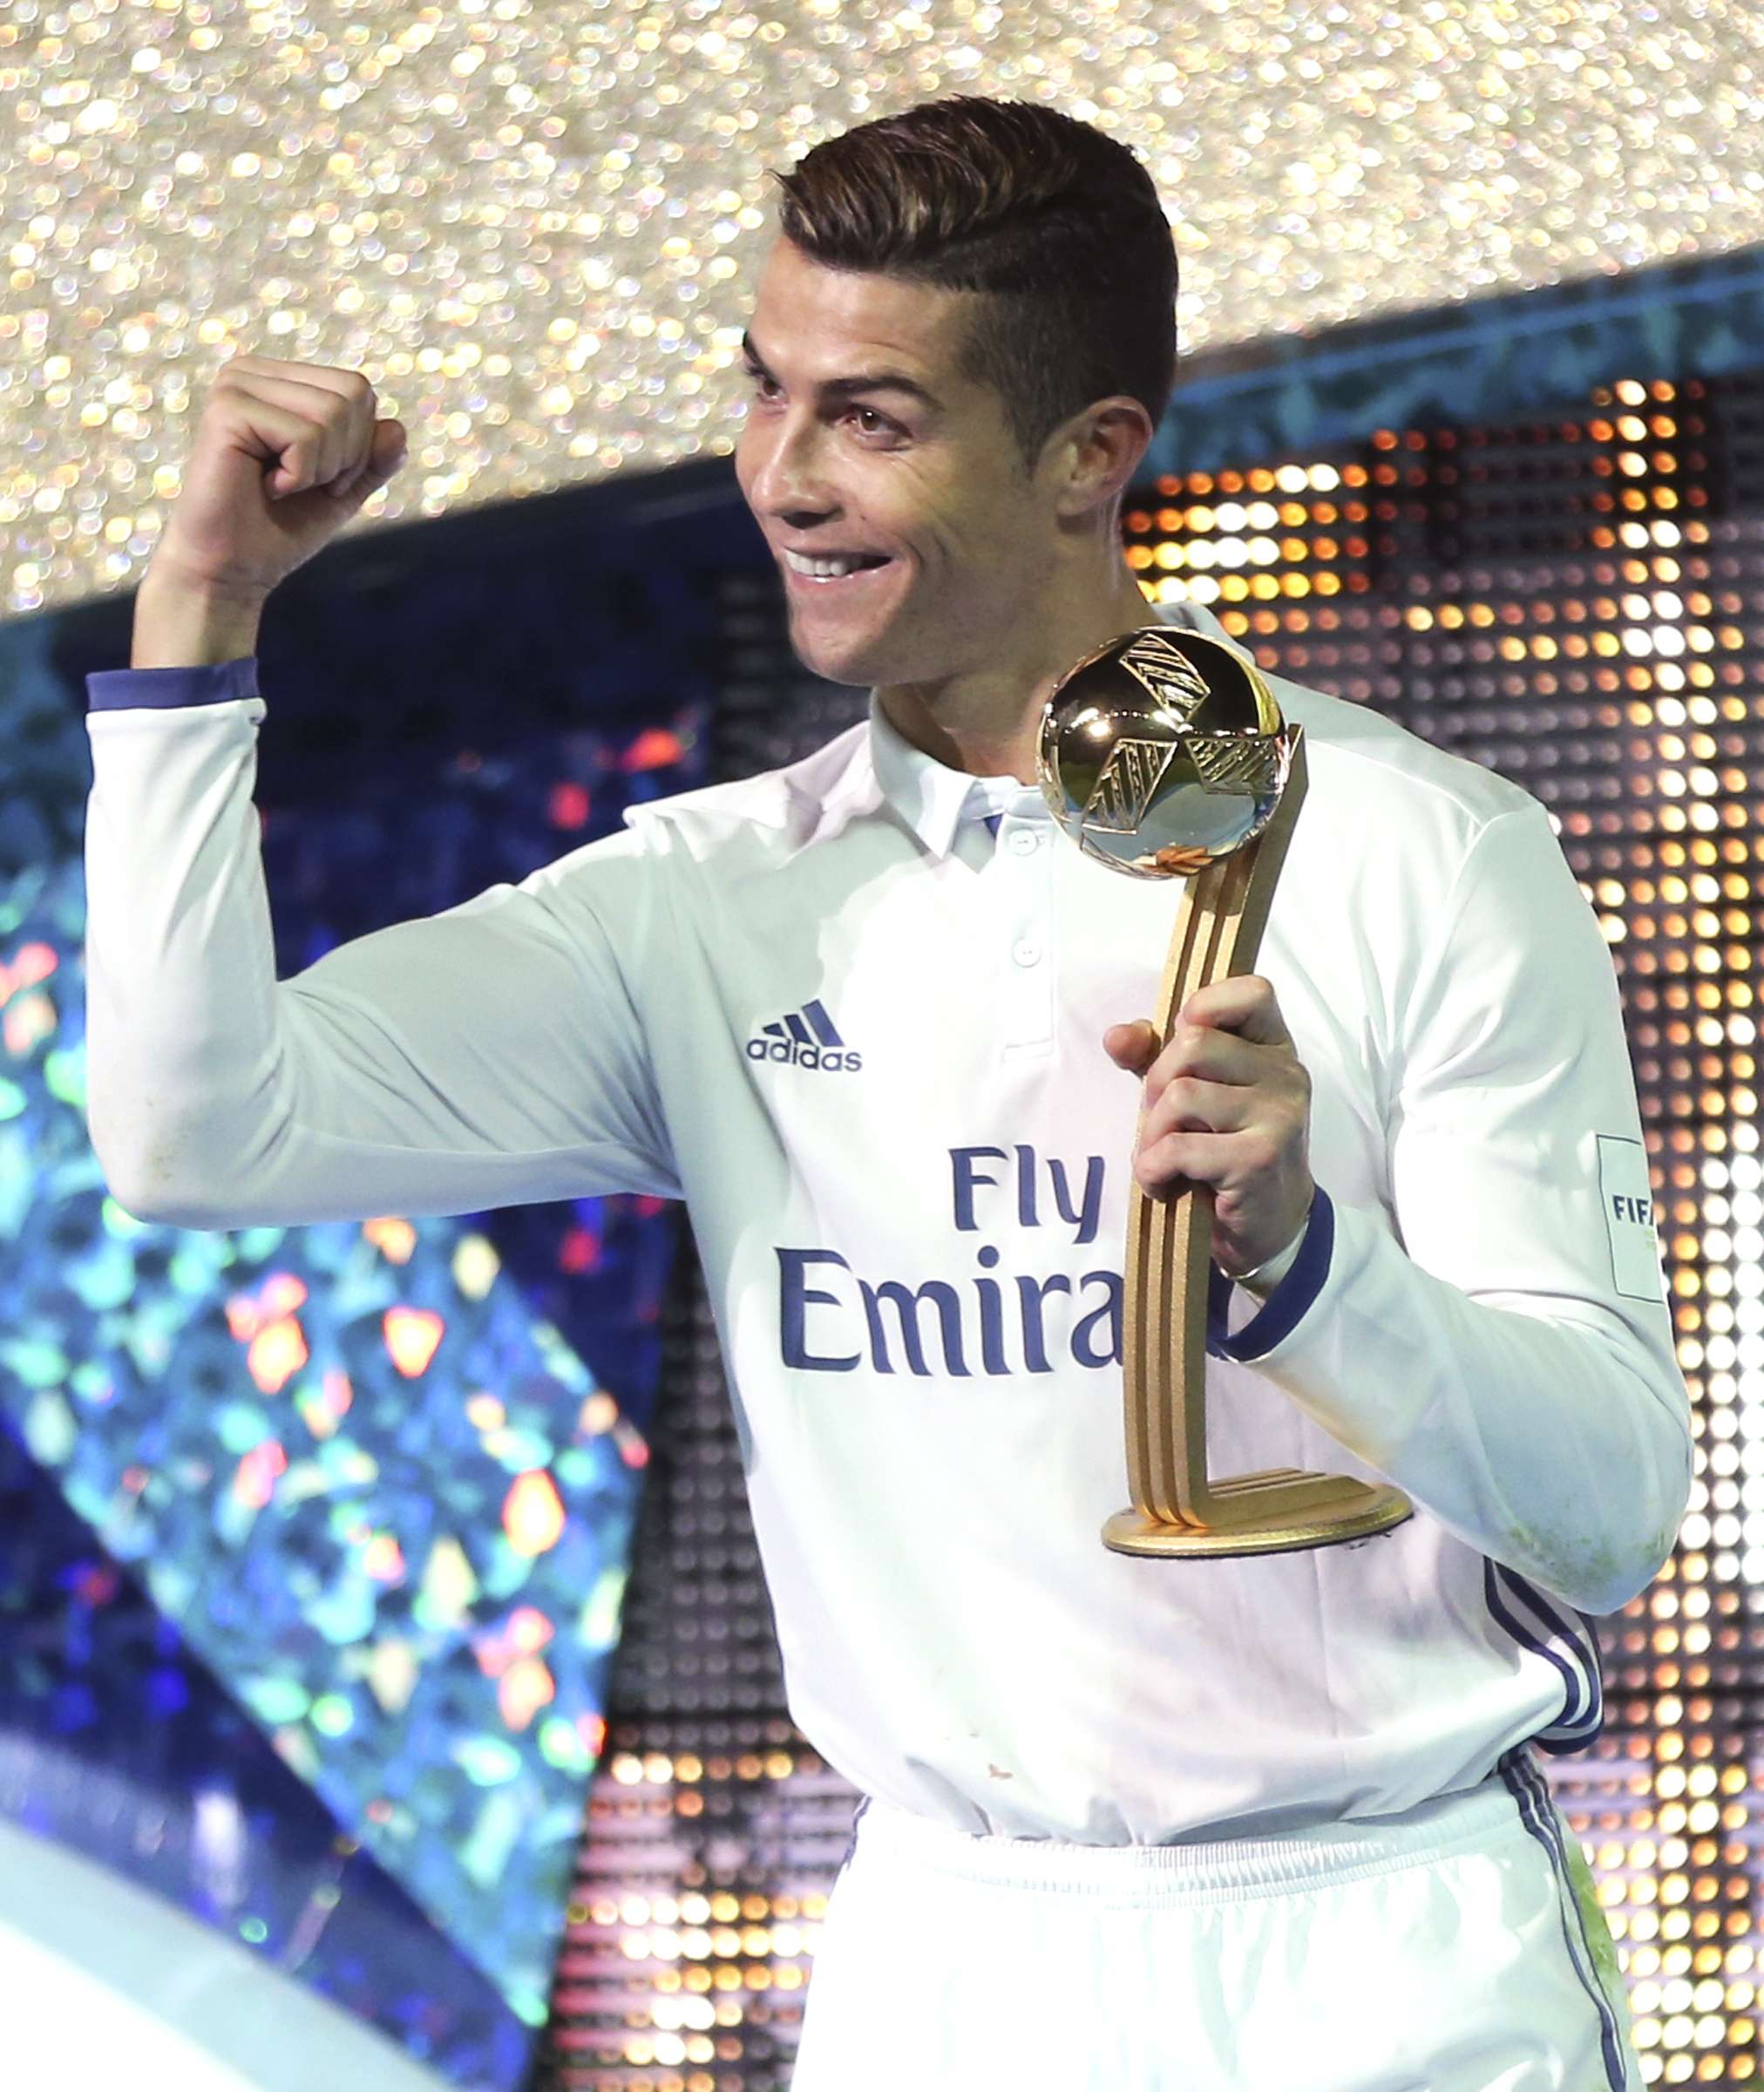 The China deal would have been worth 100 million euros a year to Cristiano Ronaldo, according to his agent. Photo: AP